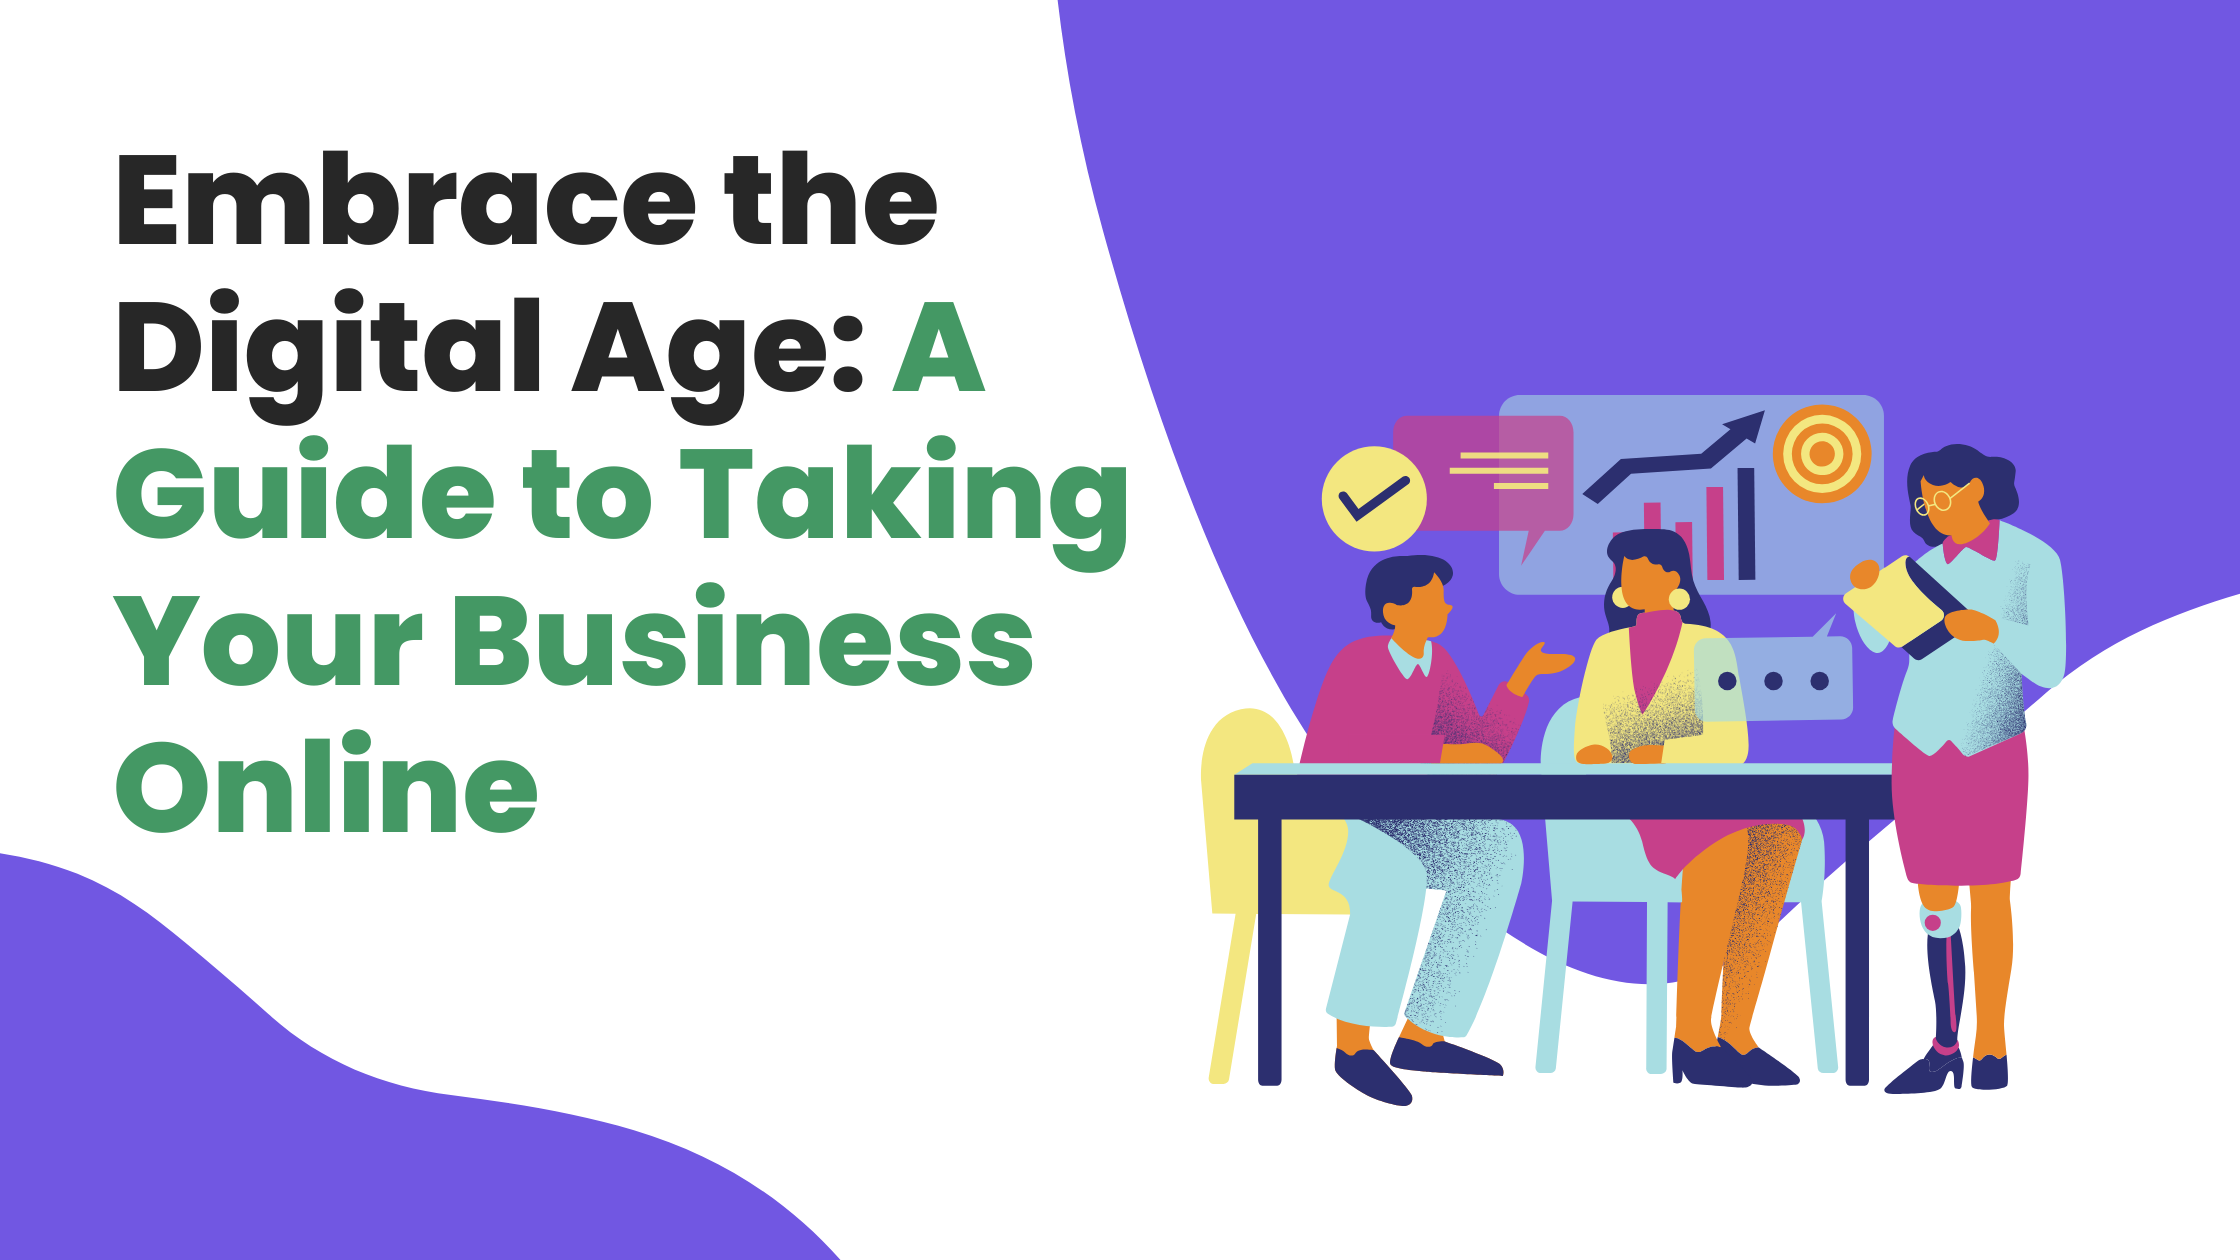 Embrace the Digital Age: A Guide to Taking Your Business Online